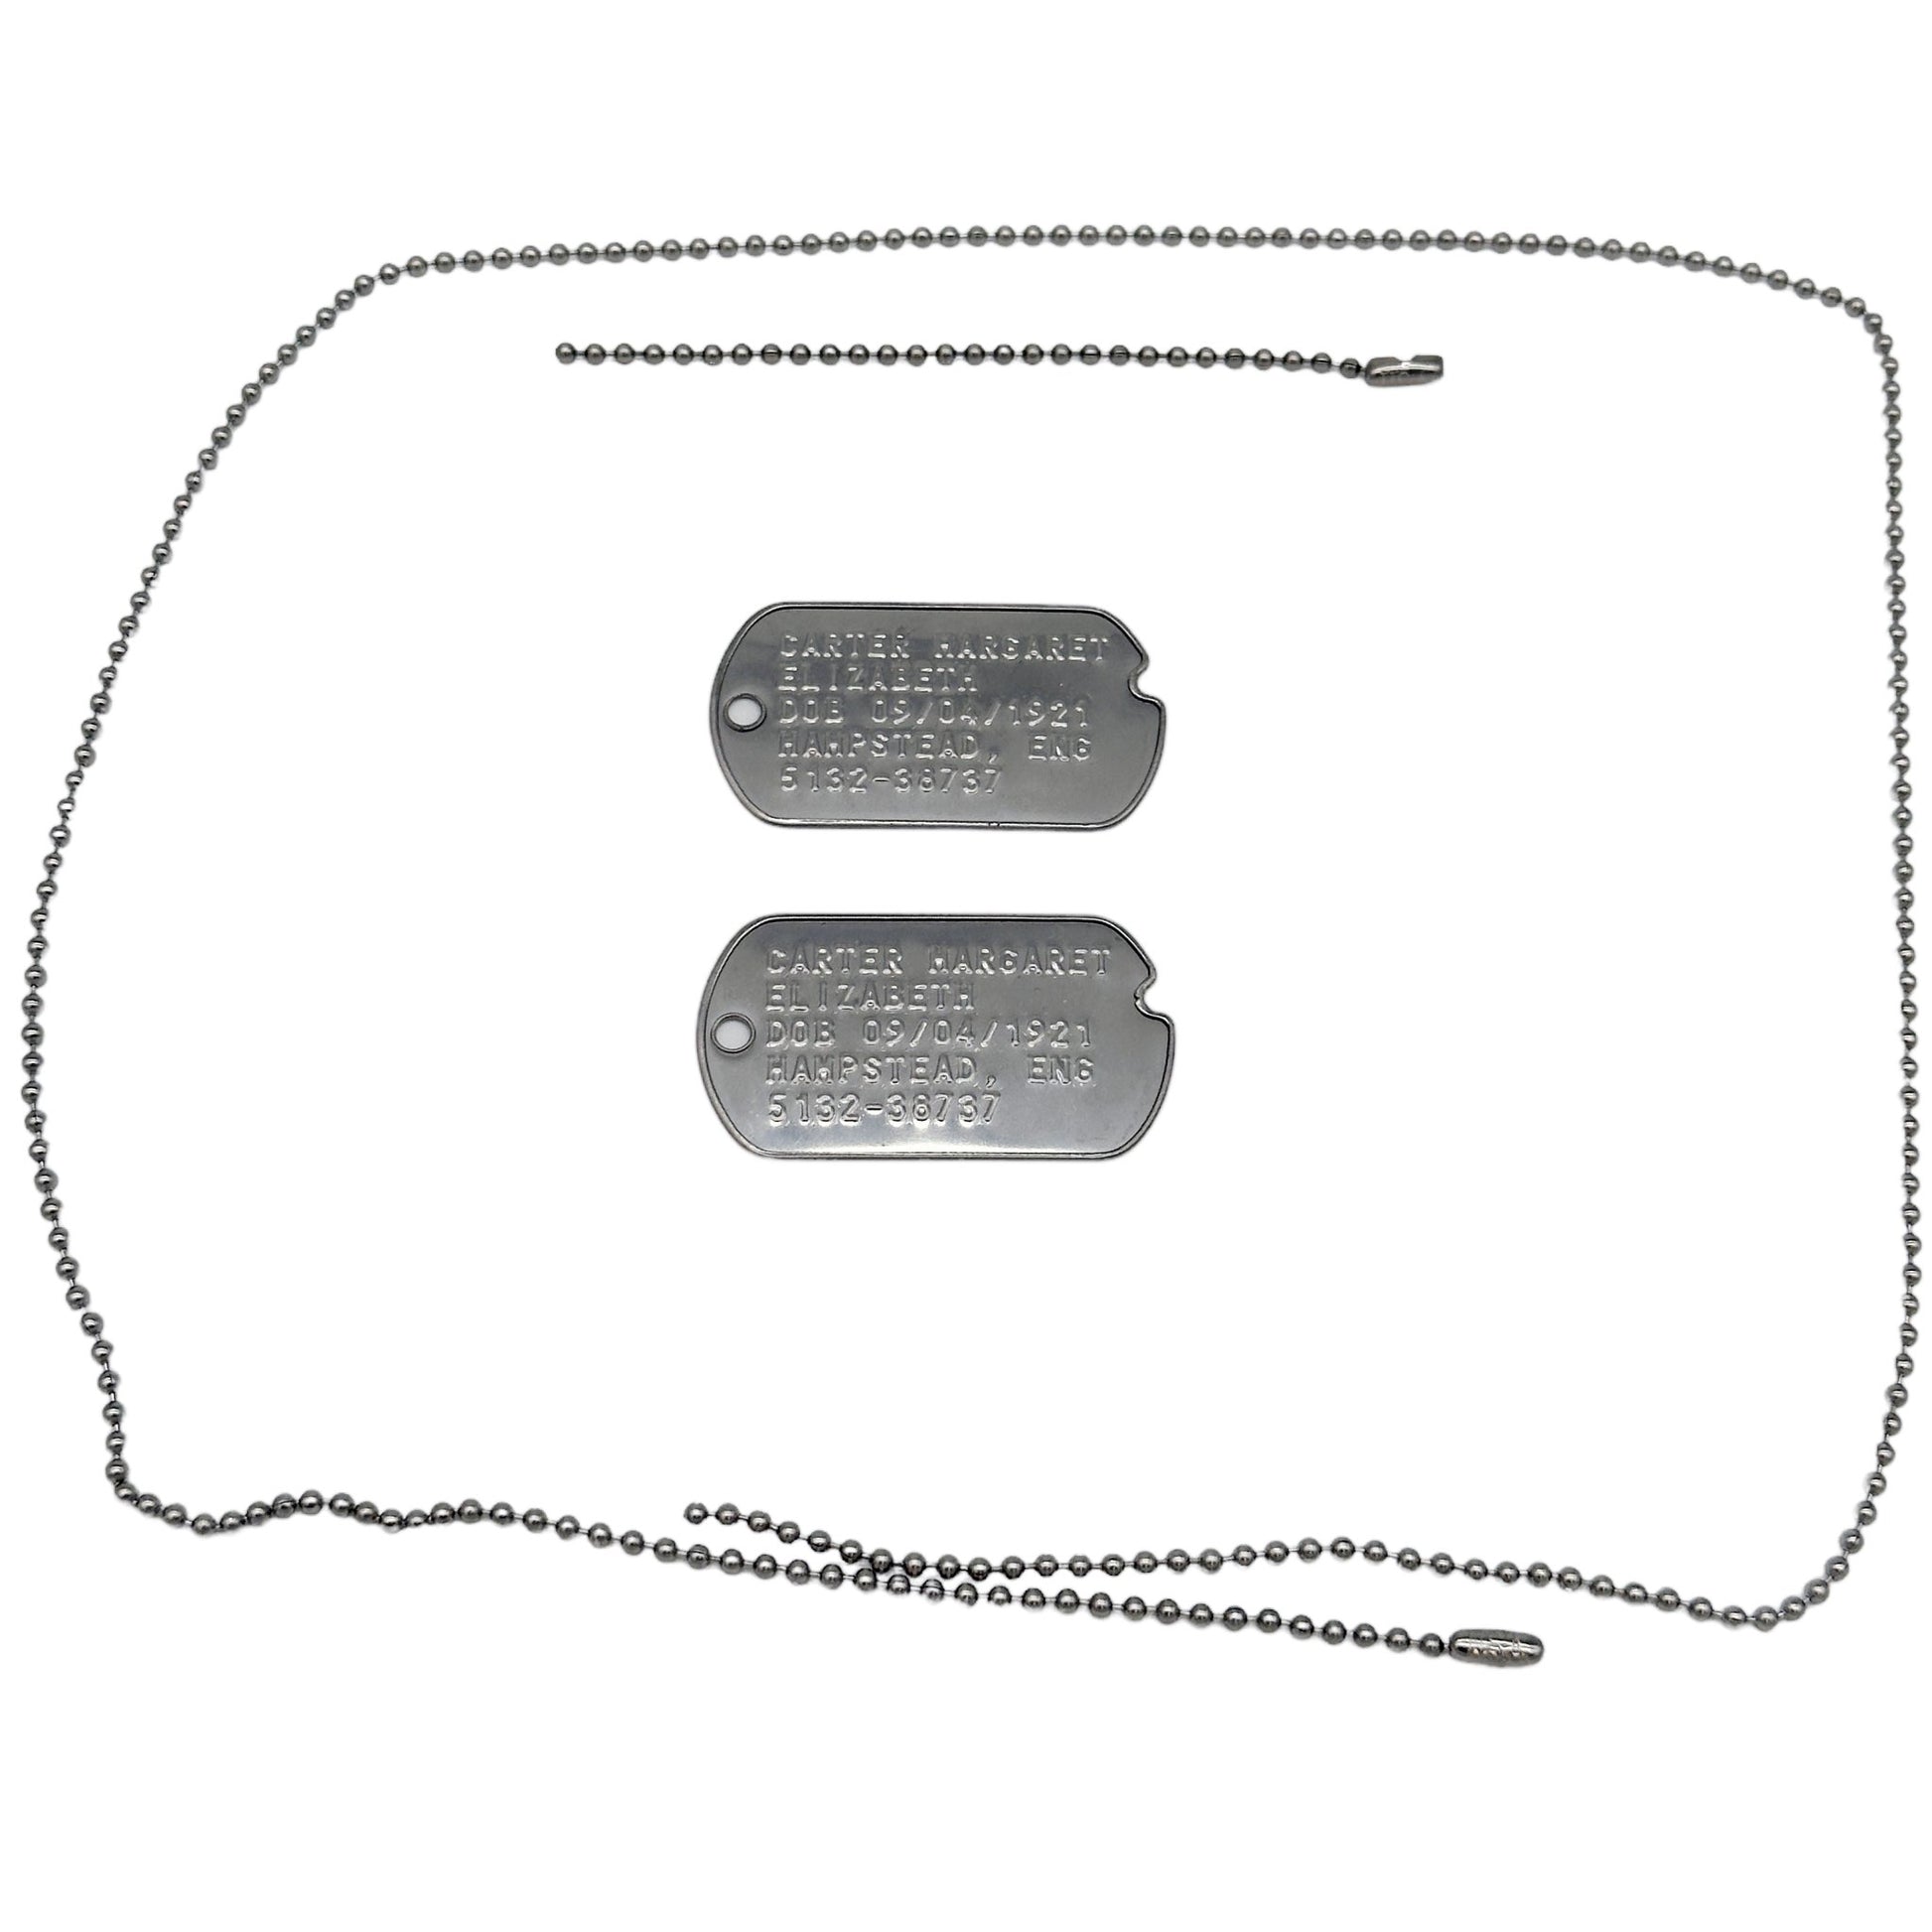 Margaret Elizabeth 'Peggy' Carter WWII Style Military Dog Tags Prop Replica - Notched pre 1965 WW2 - Stainless Steel - Chain Included - TheDogTagCo